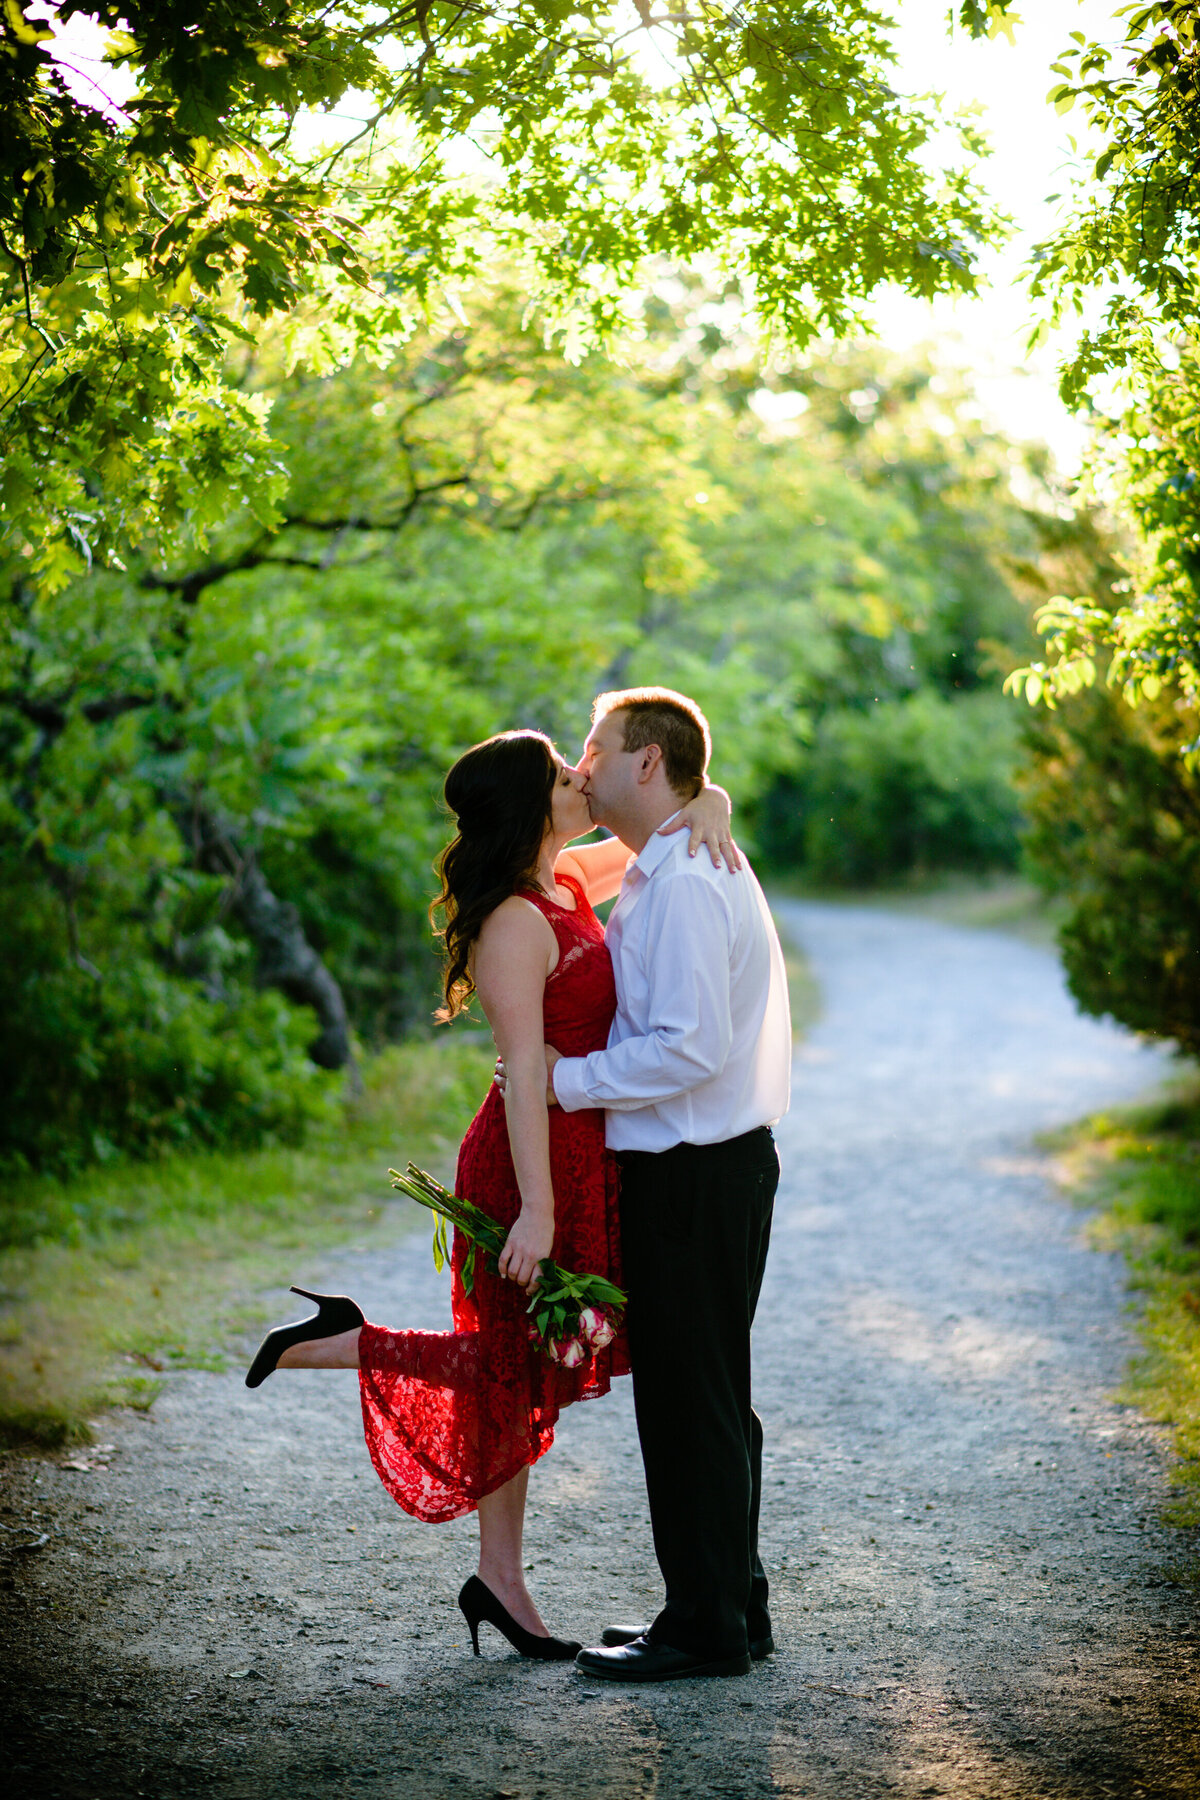 Rockport MA engagement session outdoors